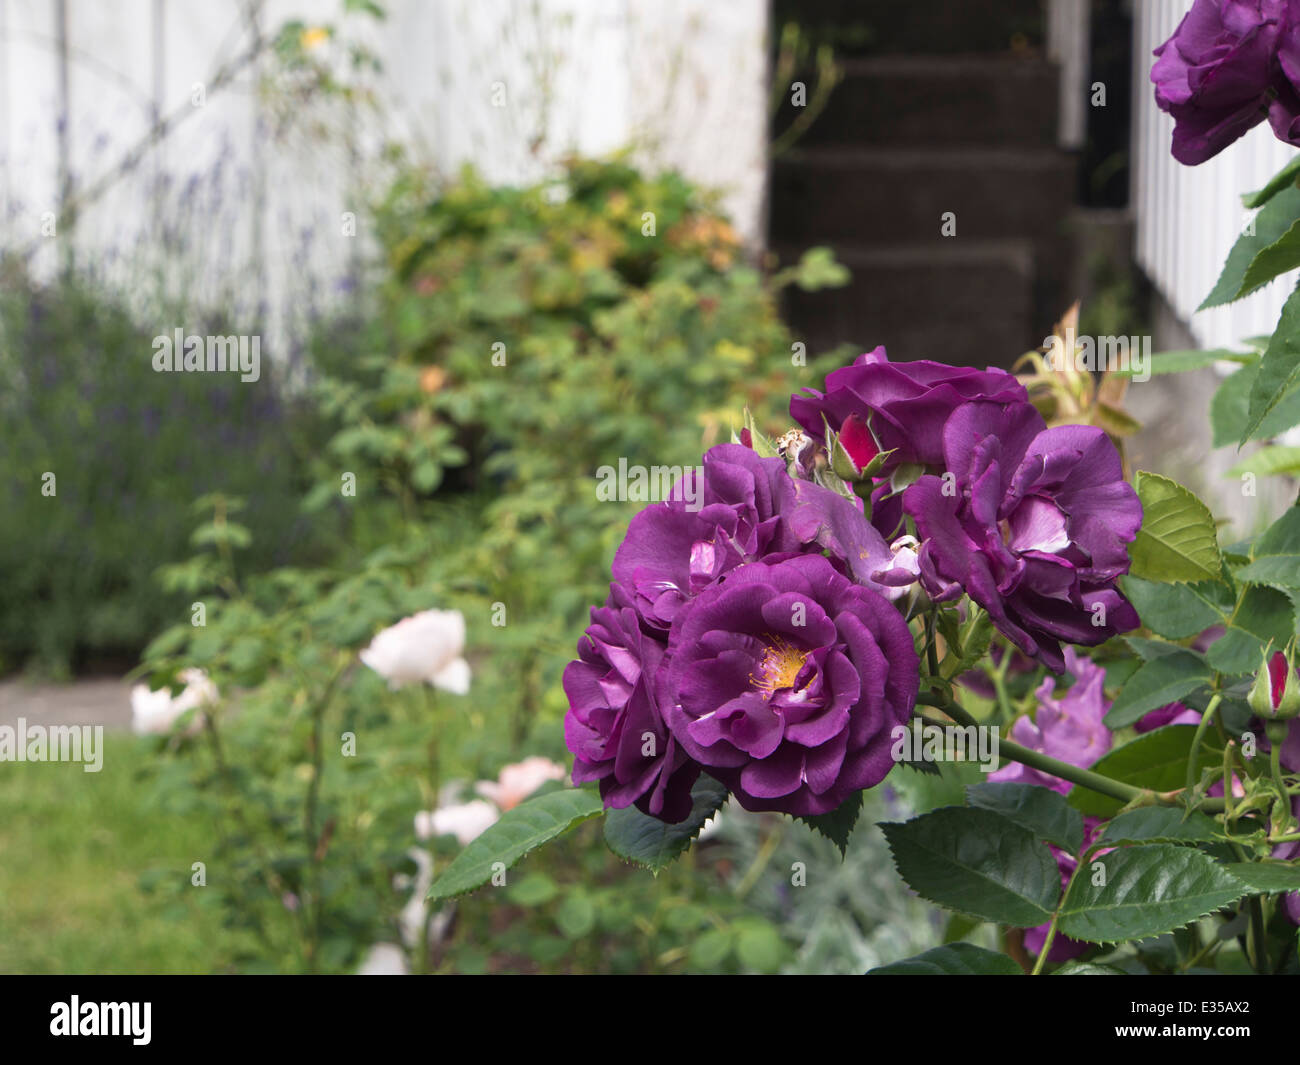 purple Rose' Garden High Resolution Stock Photography and Images - Alamy